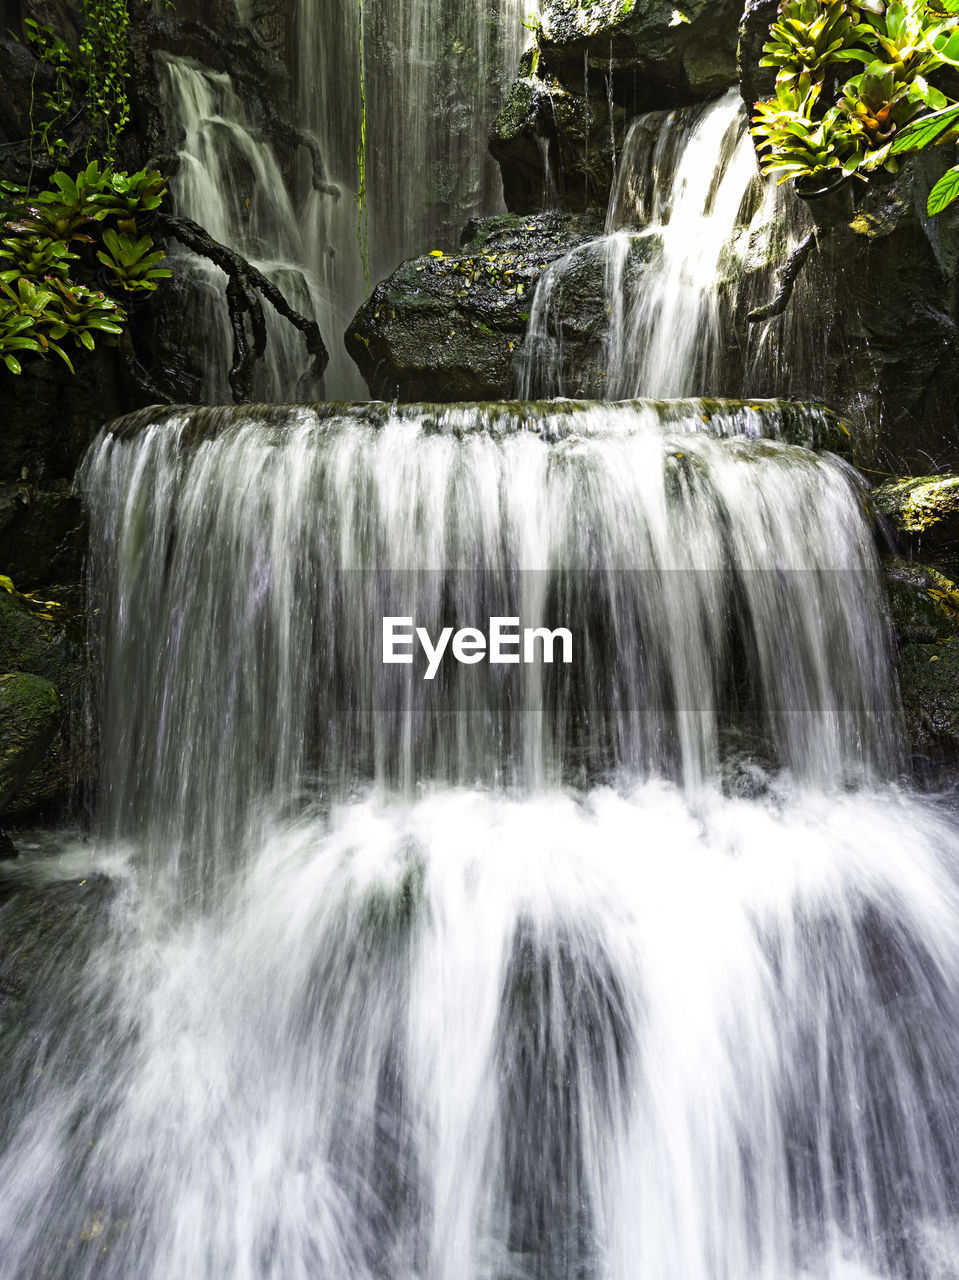 waterfall, water, beauty in nature, motion, scenics - nature, forest, nature, watercourse, body of water, environment, plant, tree, long exposure, land, no people, blurred motion, flowing water, water feature, outdoors, flowing, water resources, stream, rock, freshness, rainforest, tropical climate, idyllic